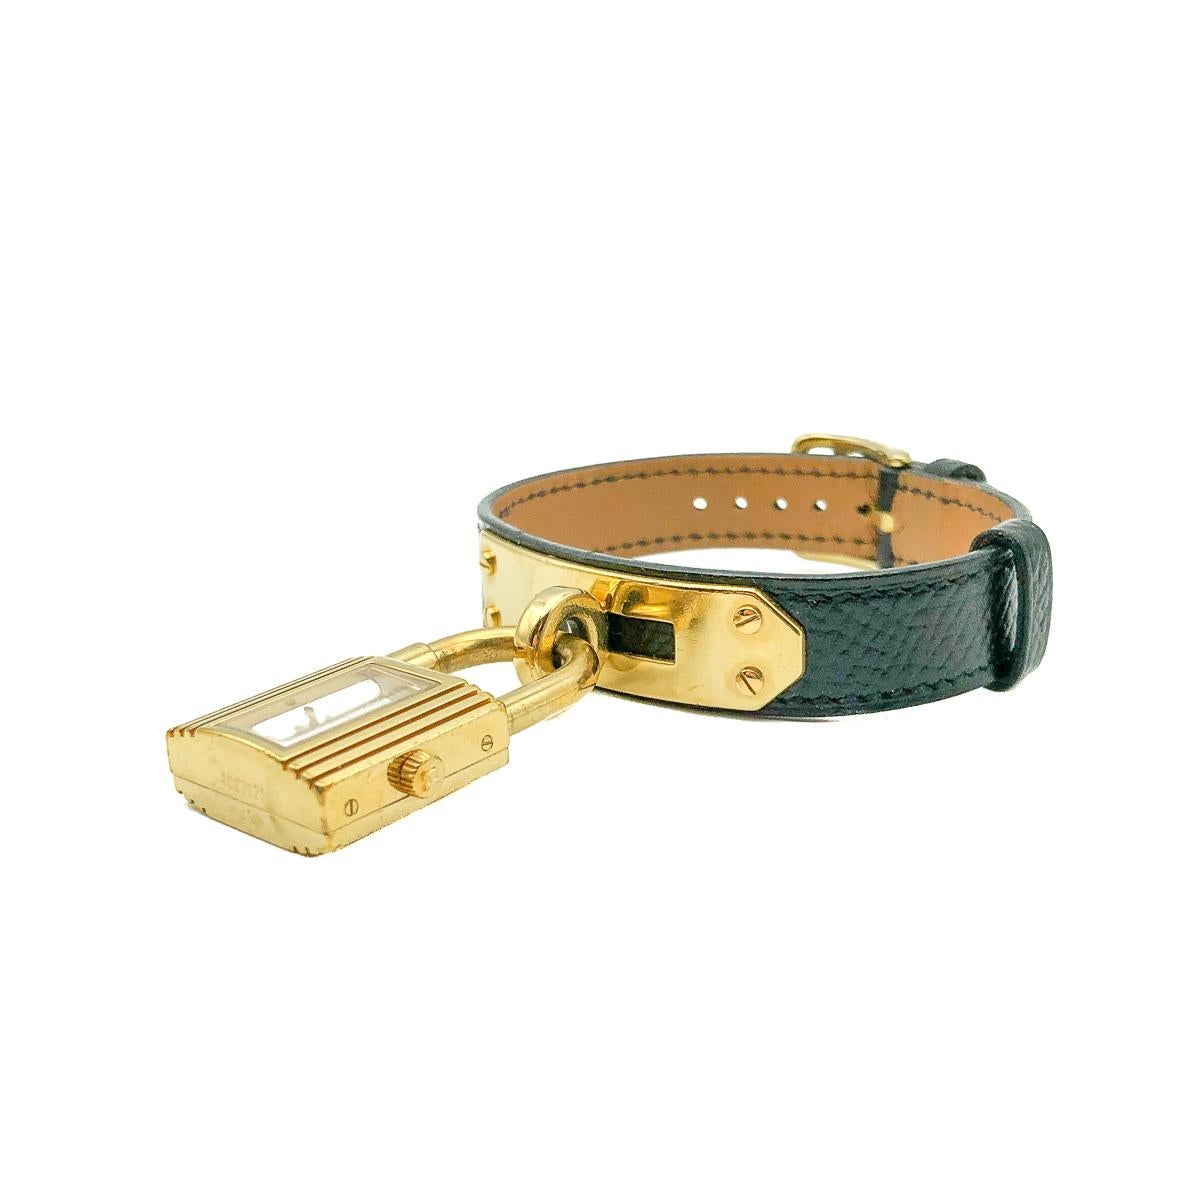 An iconic Hermès Kelly Bracelet Watch dating to the year 2000. Crafted in gold plated brass and black calf leather with a white face. In excellent vintage condition, carrying the full suite of marks, serviced by a registered watchmaker and fitted